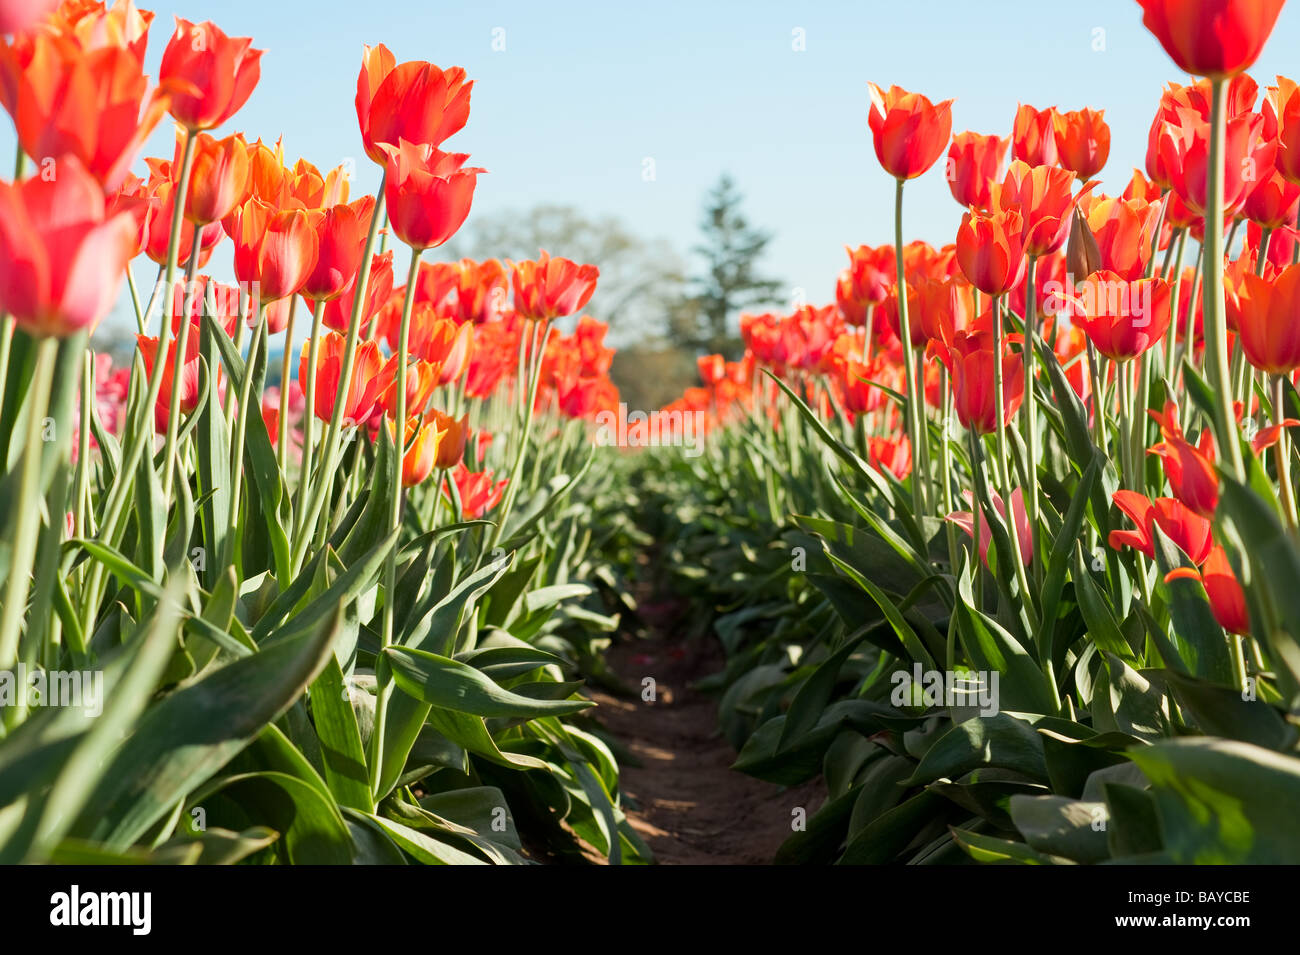 A large field of blooming colorful tulips planted in rows Stock Photo